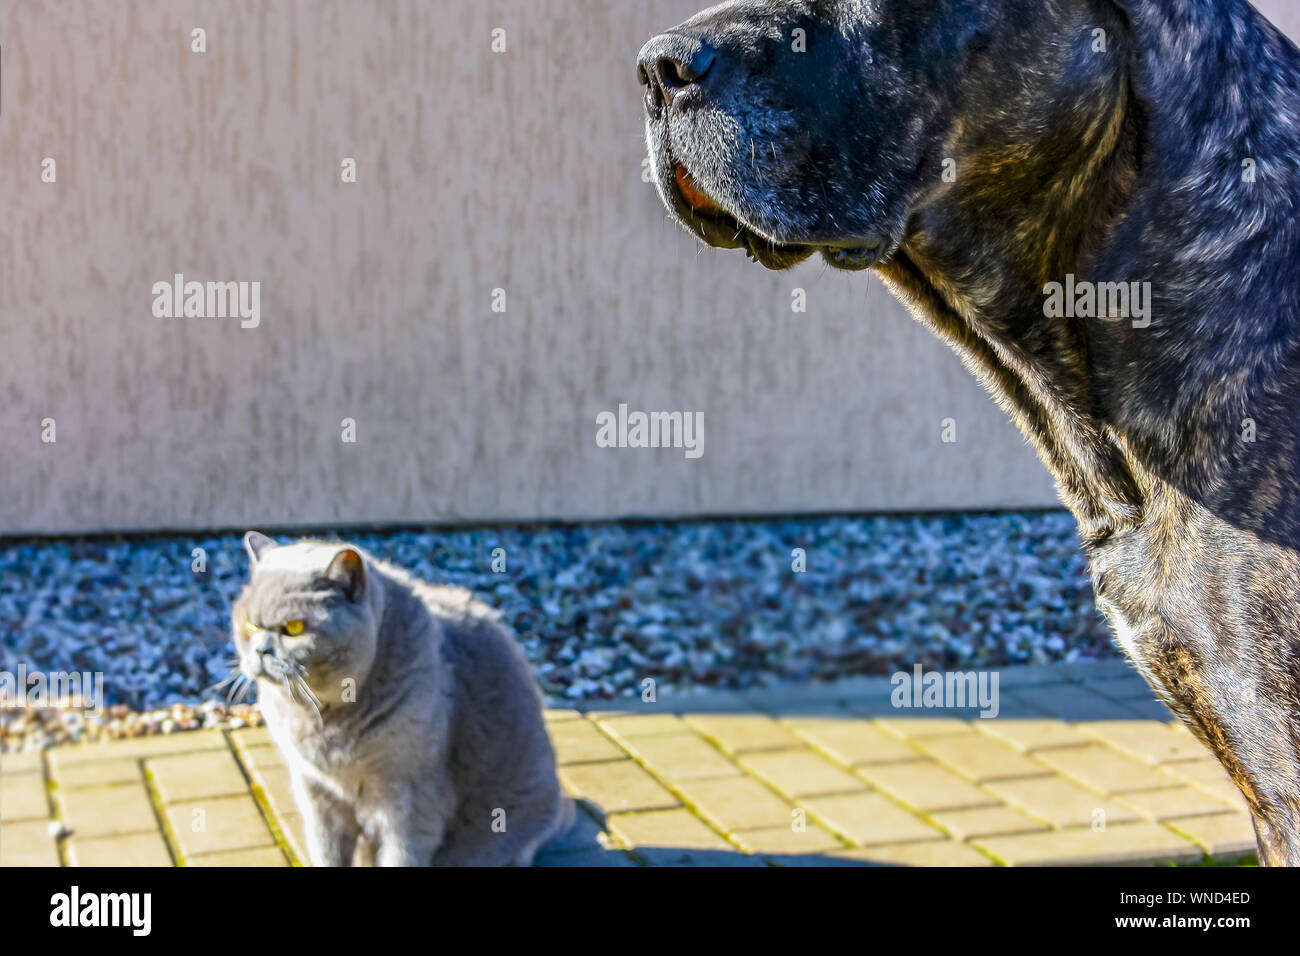 Cane-corso dog with cat looks out at home. Outdoor. Spring Season Stock Photo